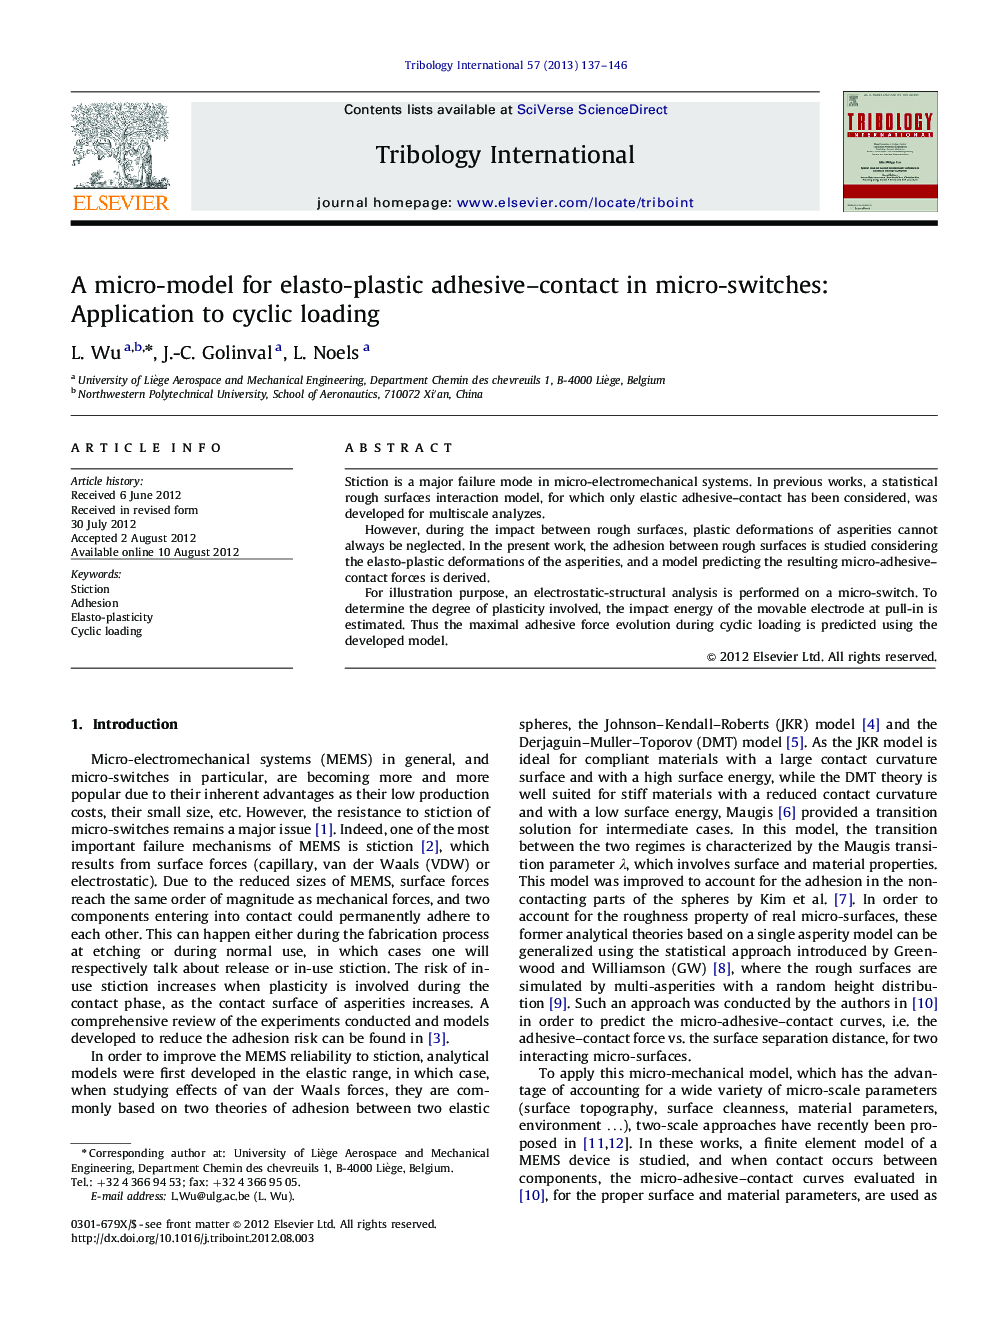 A micro-model for elasto-plastic adhesive–contact in micro-switches: Application to cyclic loading